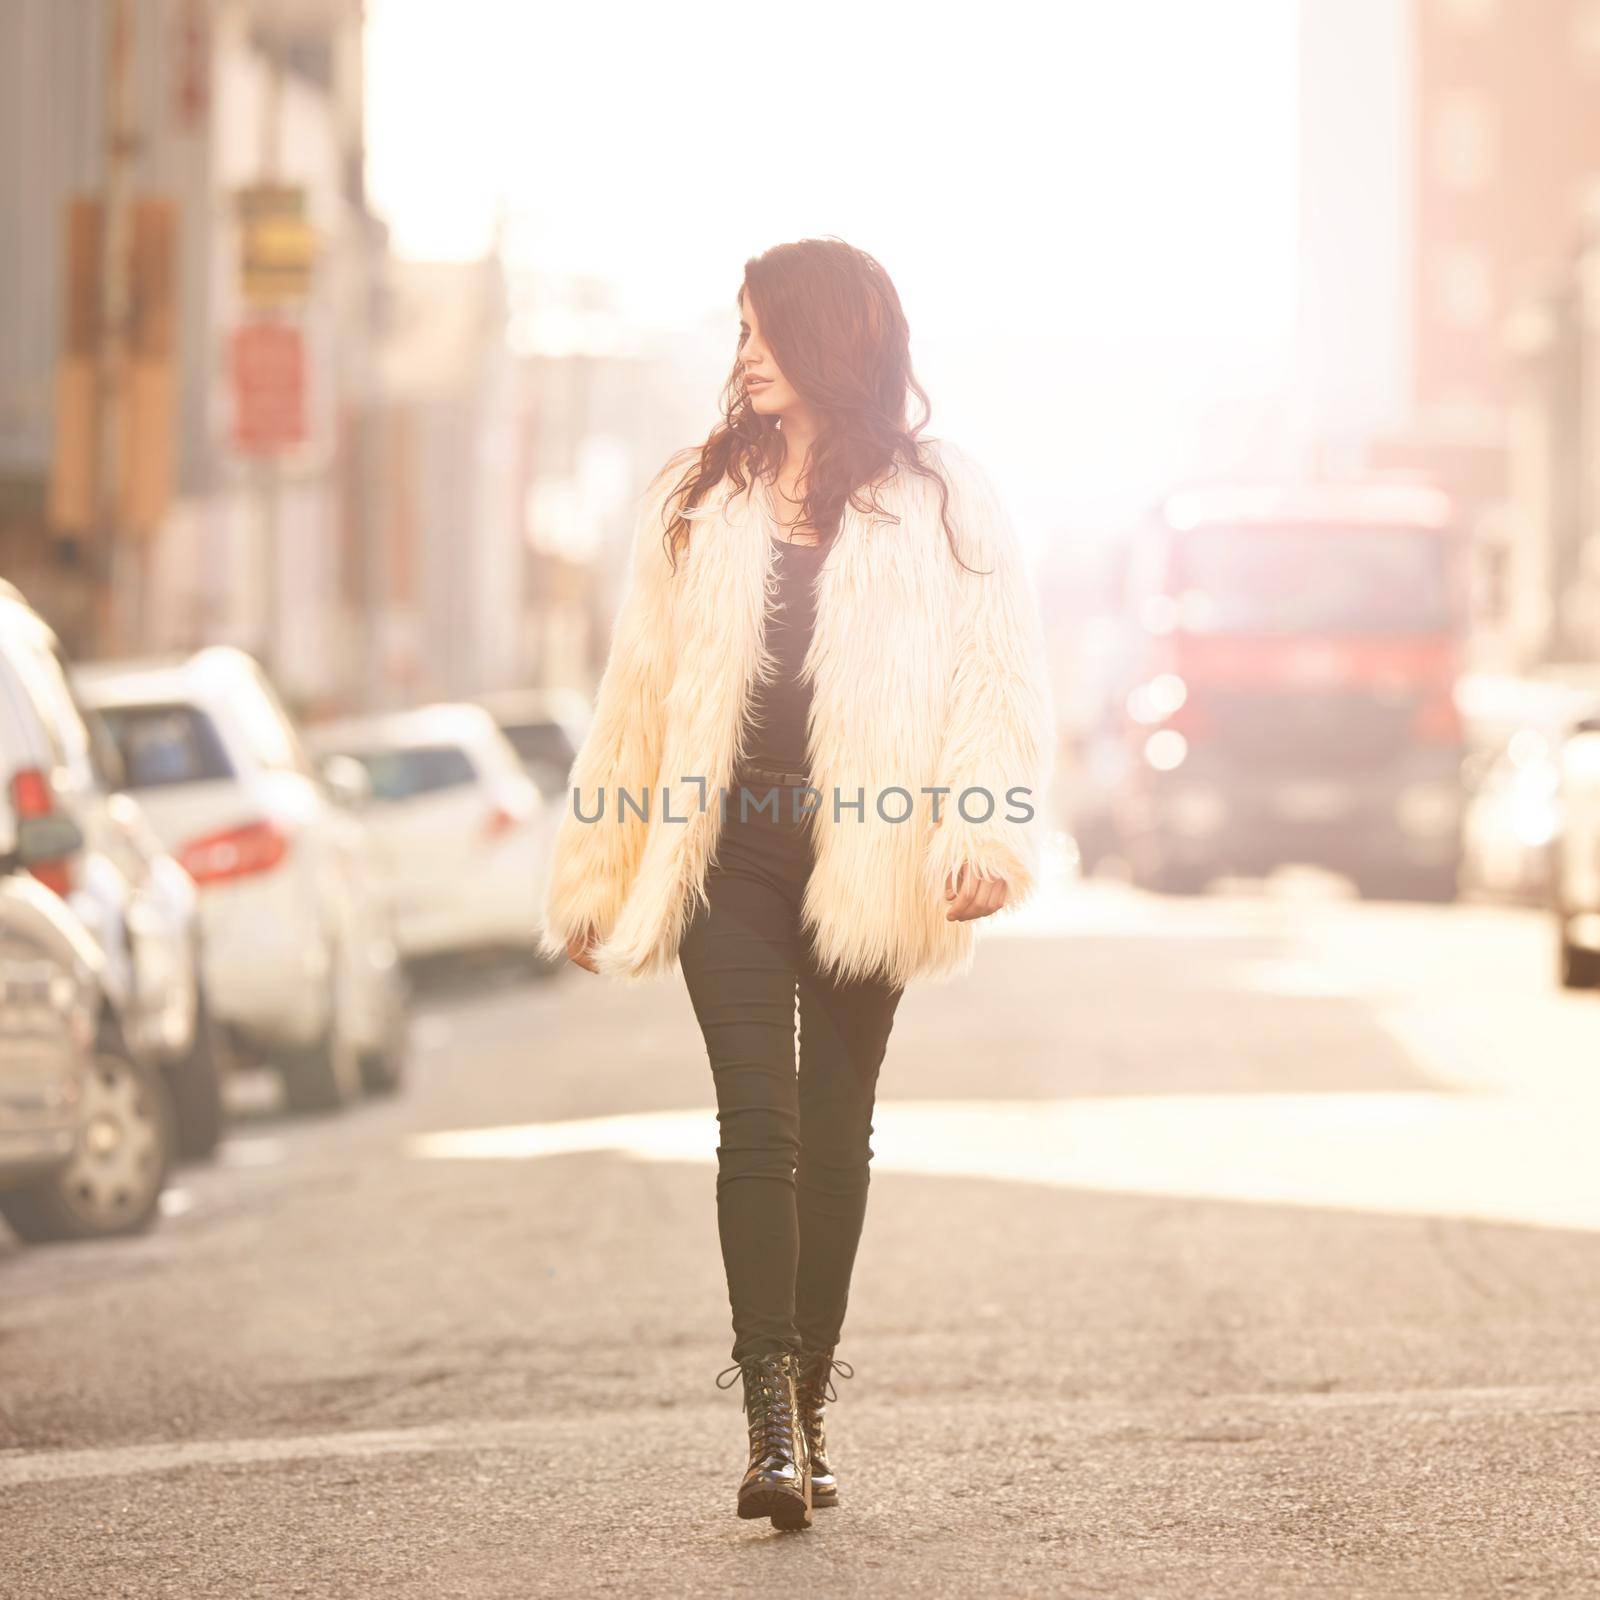 The road is her runway. an attractive young woman out and about in the city